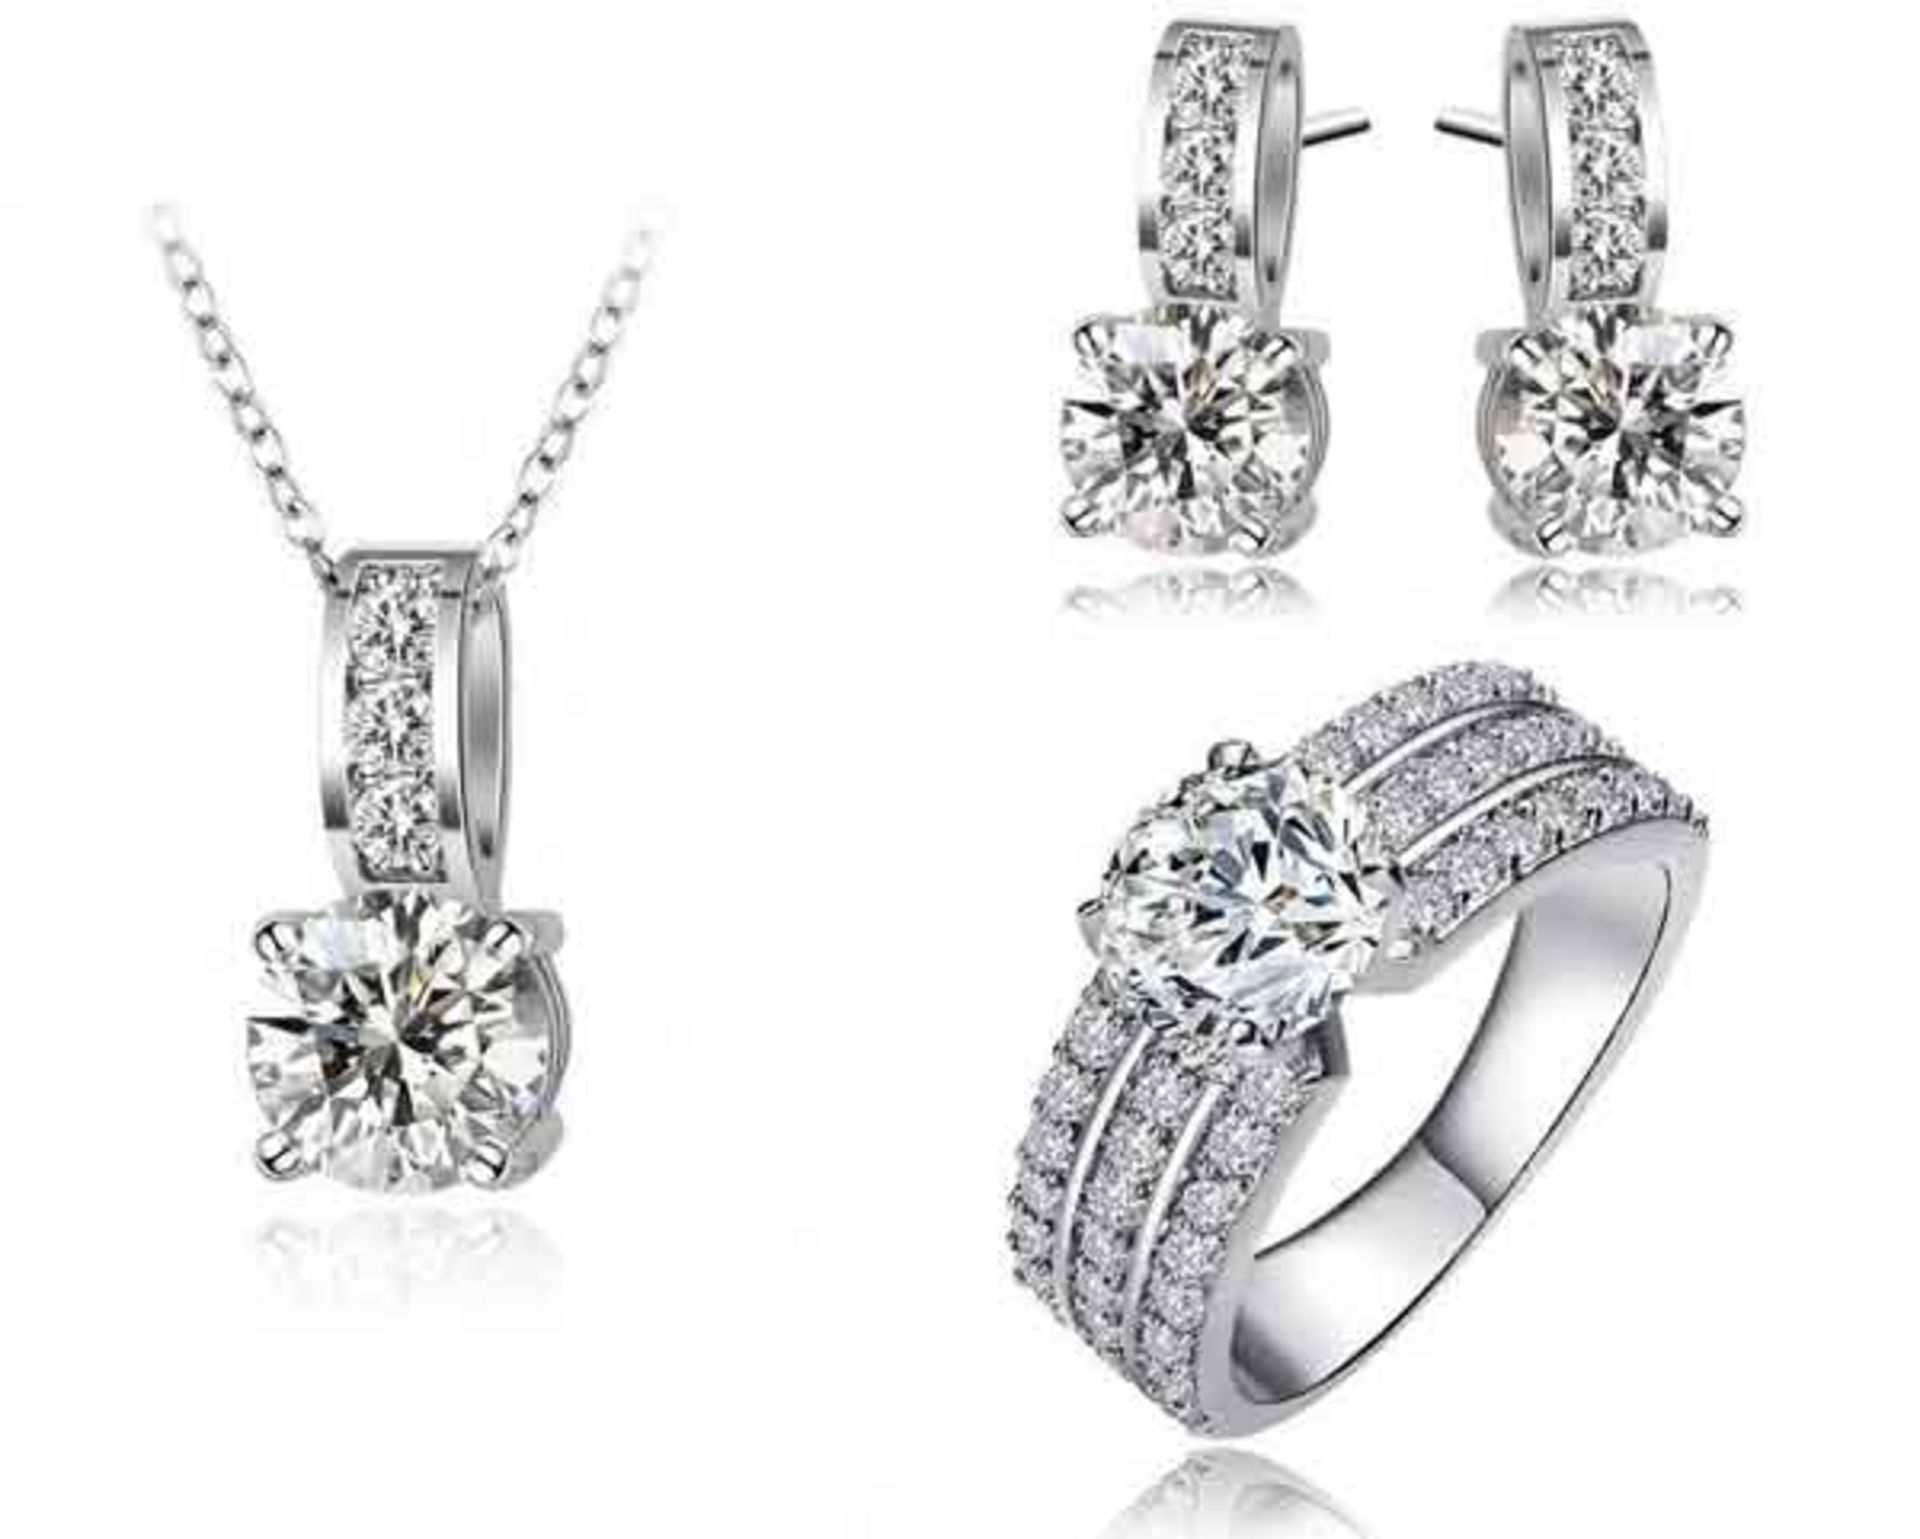 V Brand New Platinum Plated CZ Three Piece Necklace Earring and Ring set X 2 YOUR BID PRICE TO BE